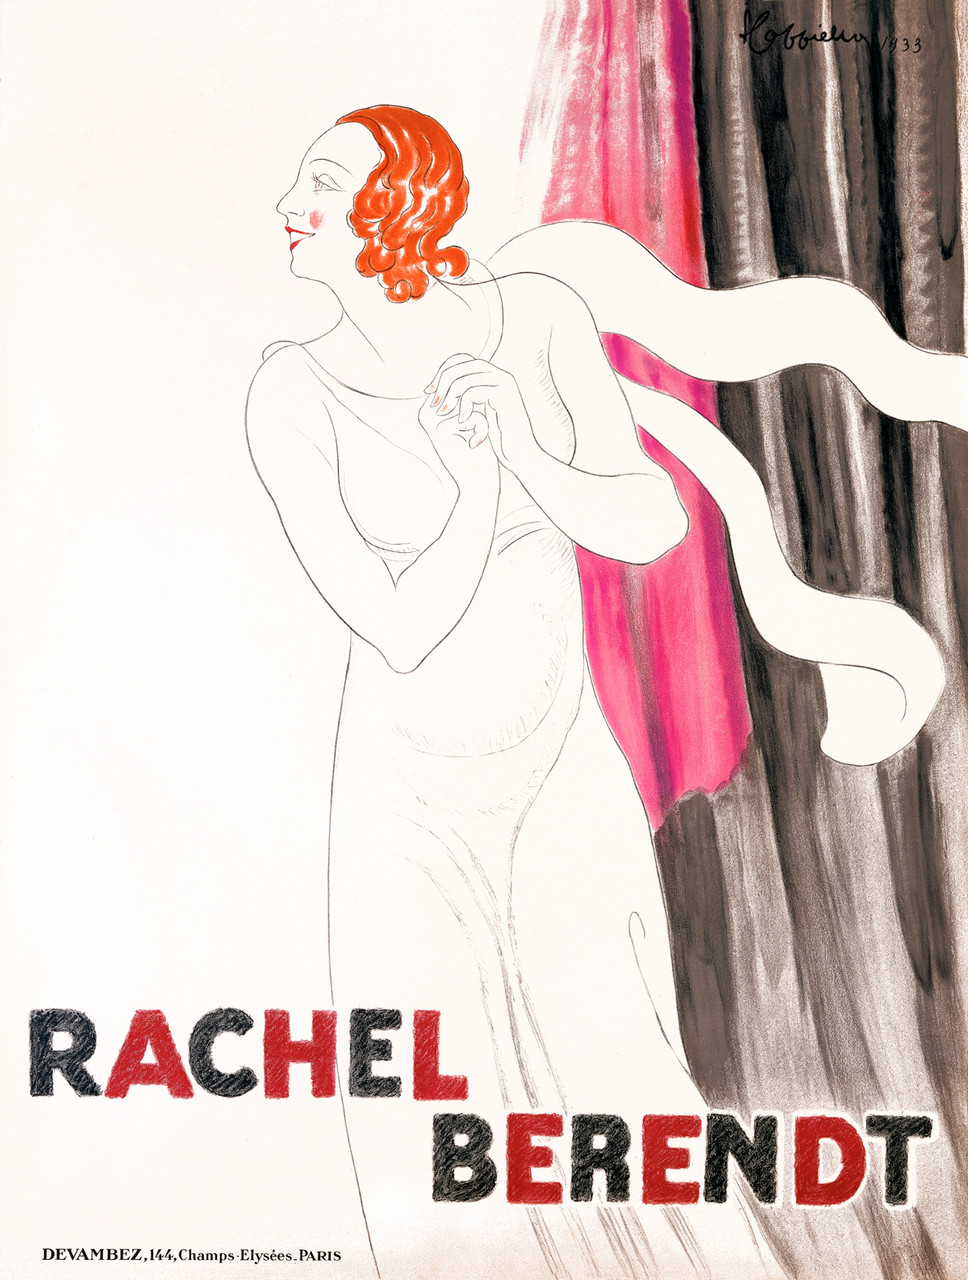 Rachel Berendt poster by L. Cappiello 1933 France - Beautiful Vintage Poster Reproduction. This vertical French poster advertises the famous Rachel Brendt. The The actress is shown in outline against a white background with red hair. Giclee Advertising Prints